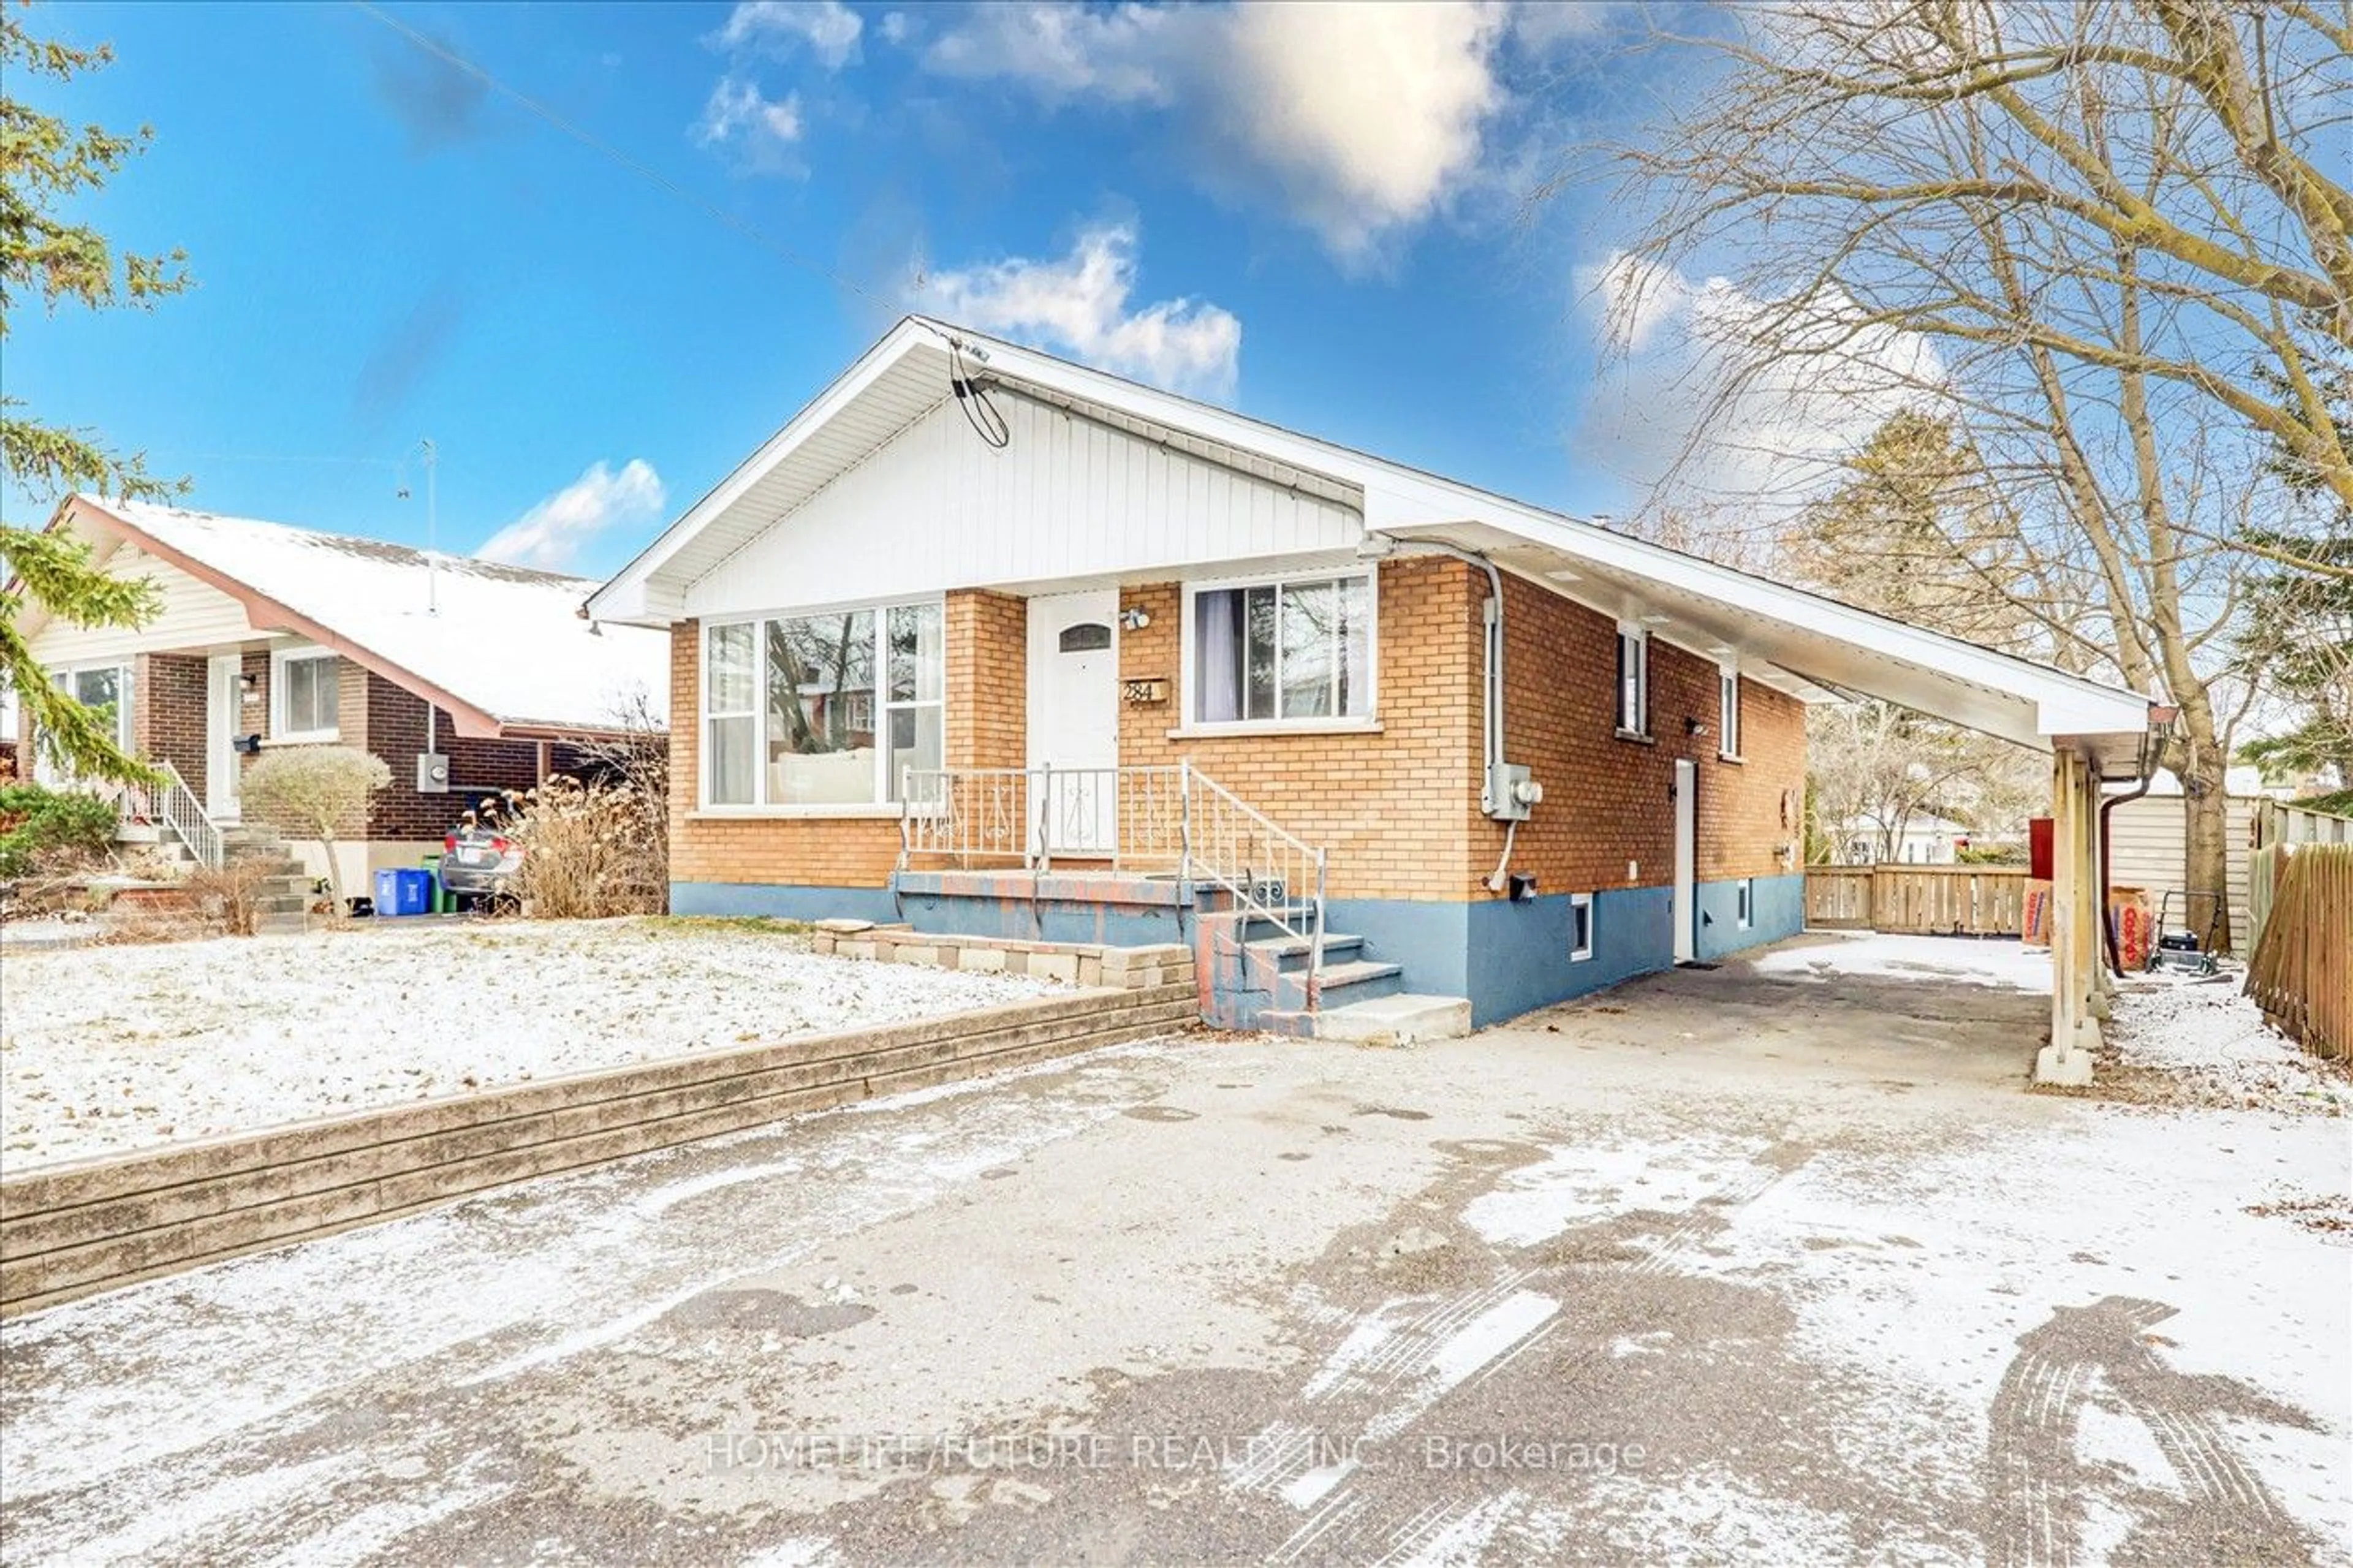 Frontside or backside of a home for 284 Adelaide Ave, Oshawa Ontario L1J 2R3